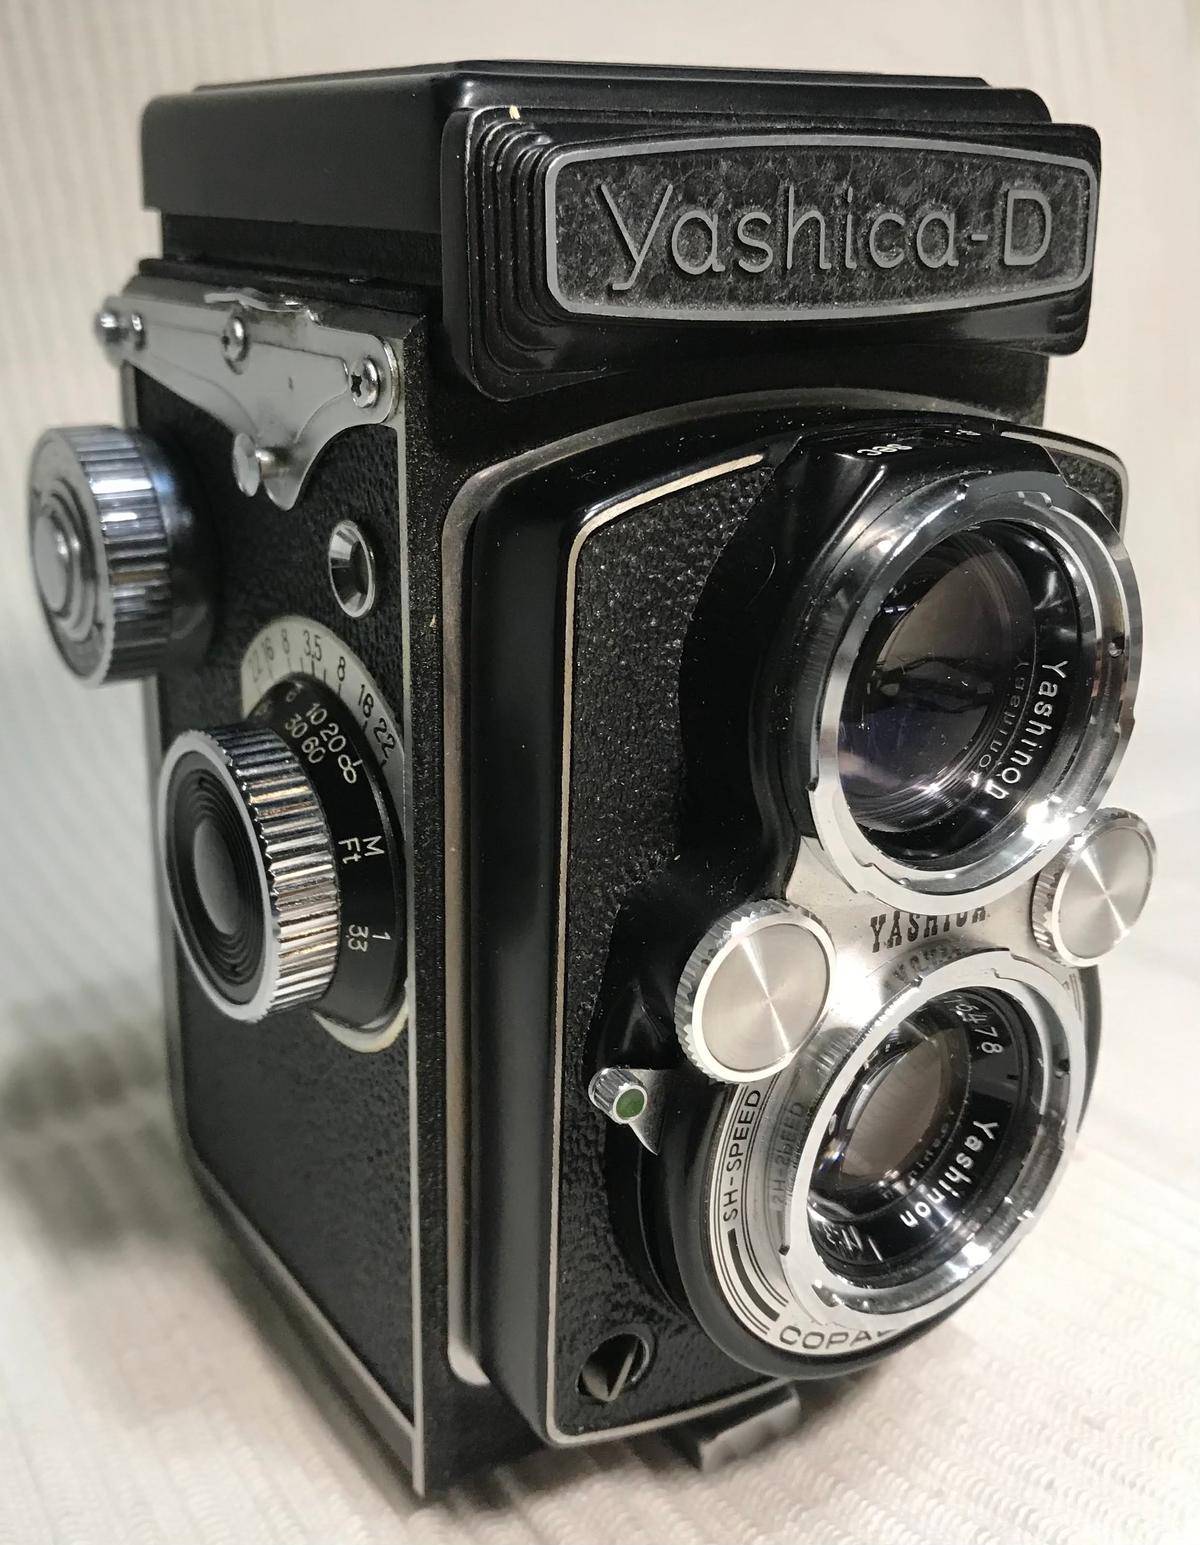 A Yashica-D camera from the collection. (Courtesy of Fridrik)